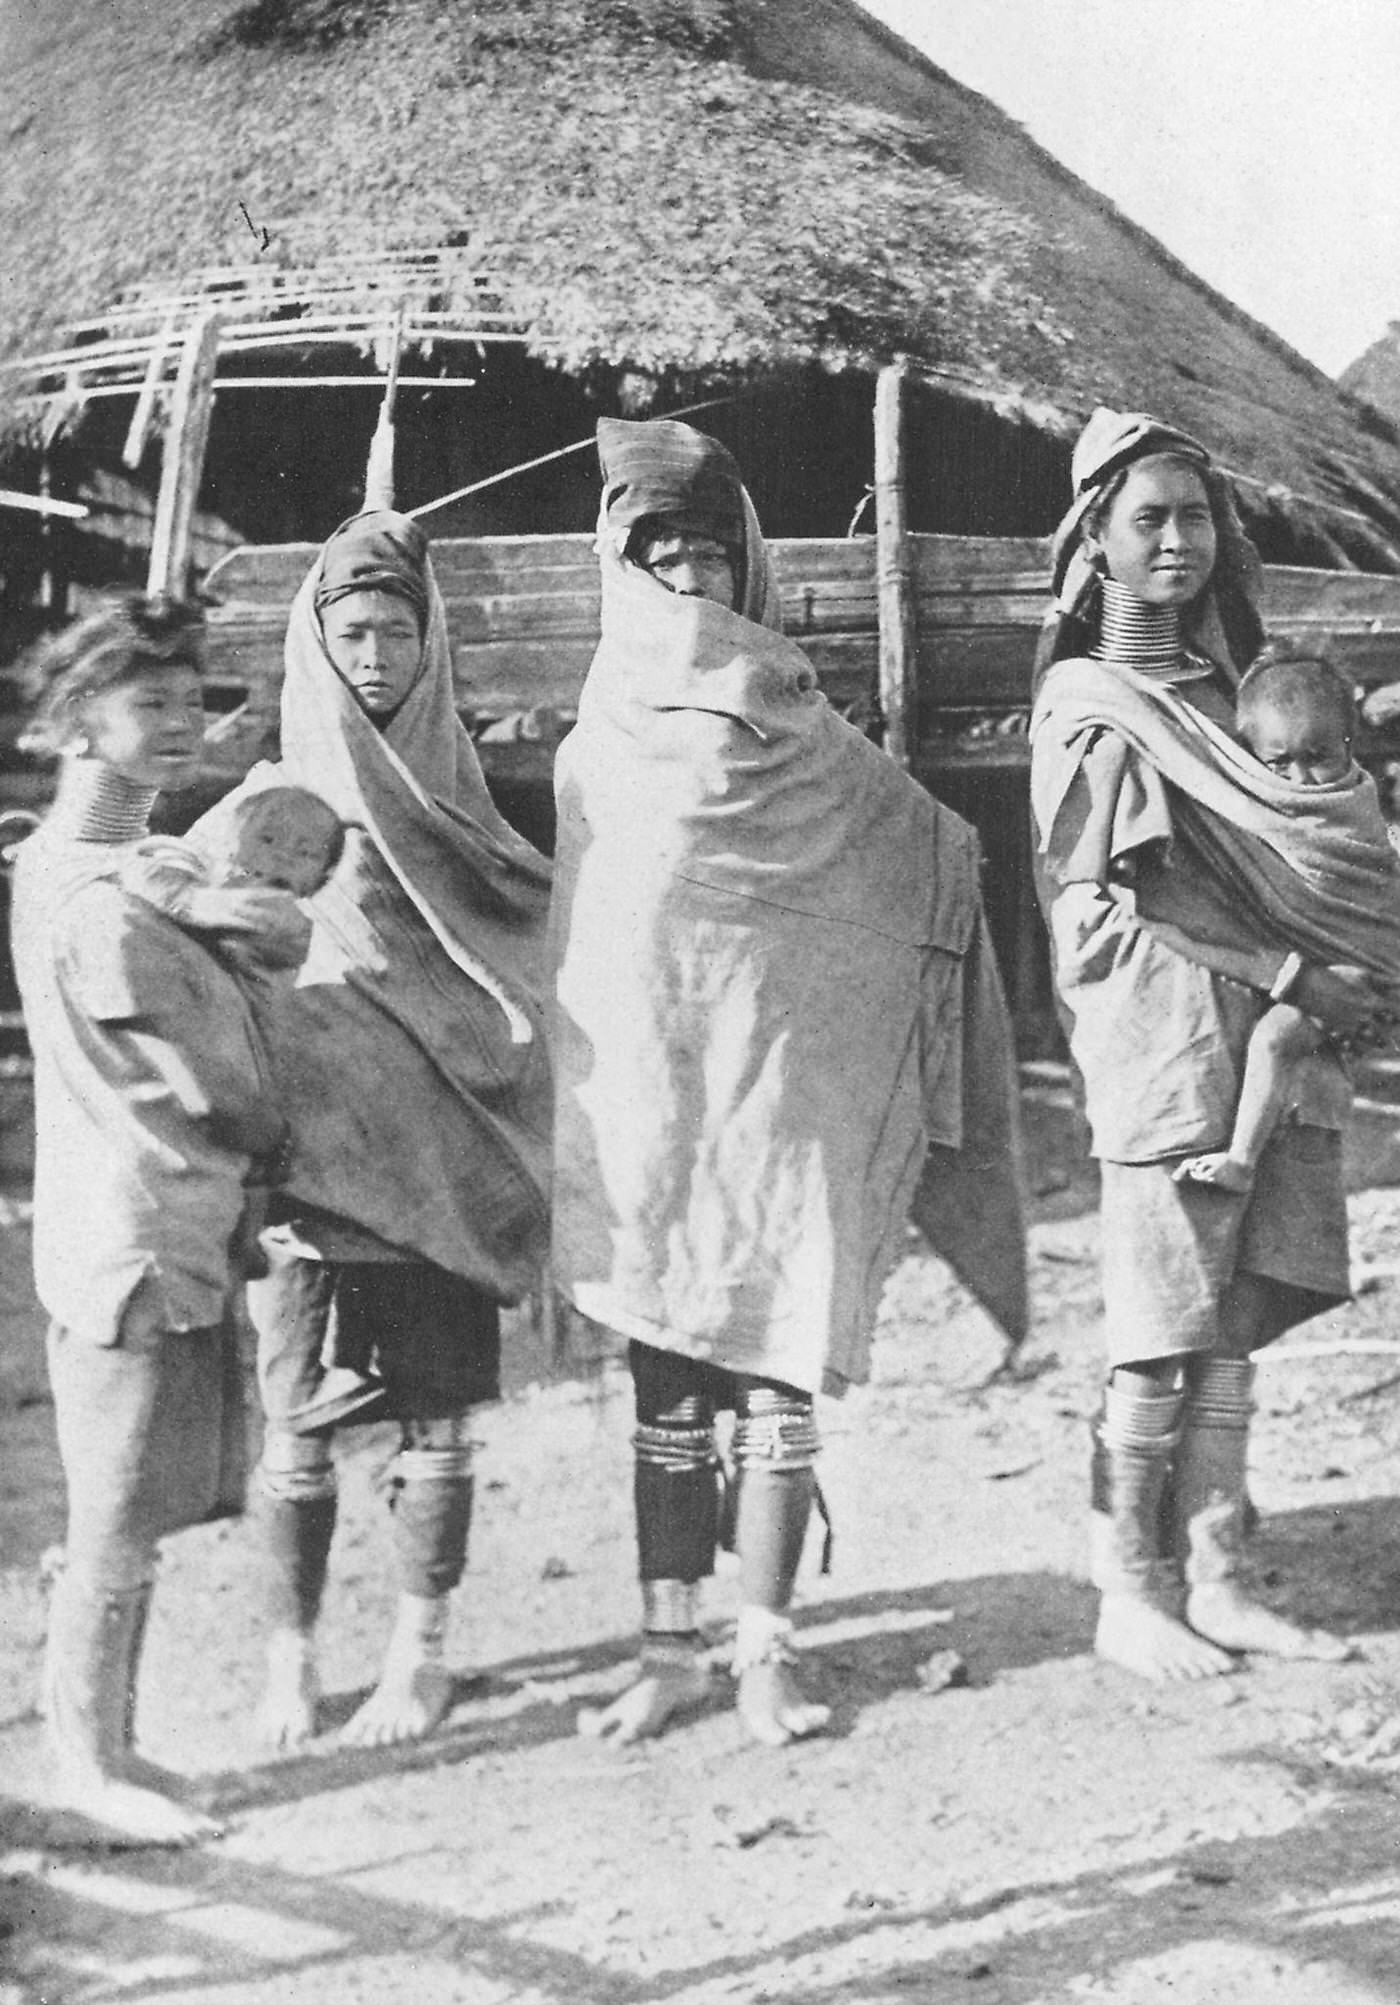 Padaung tribe members modeling cold weather clothing, Myanmar, 1922.